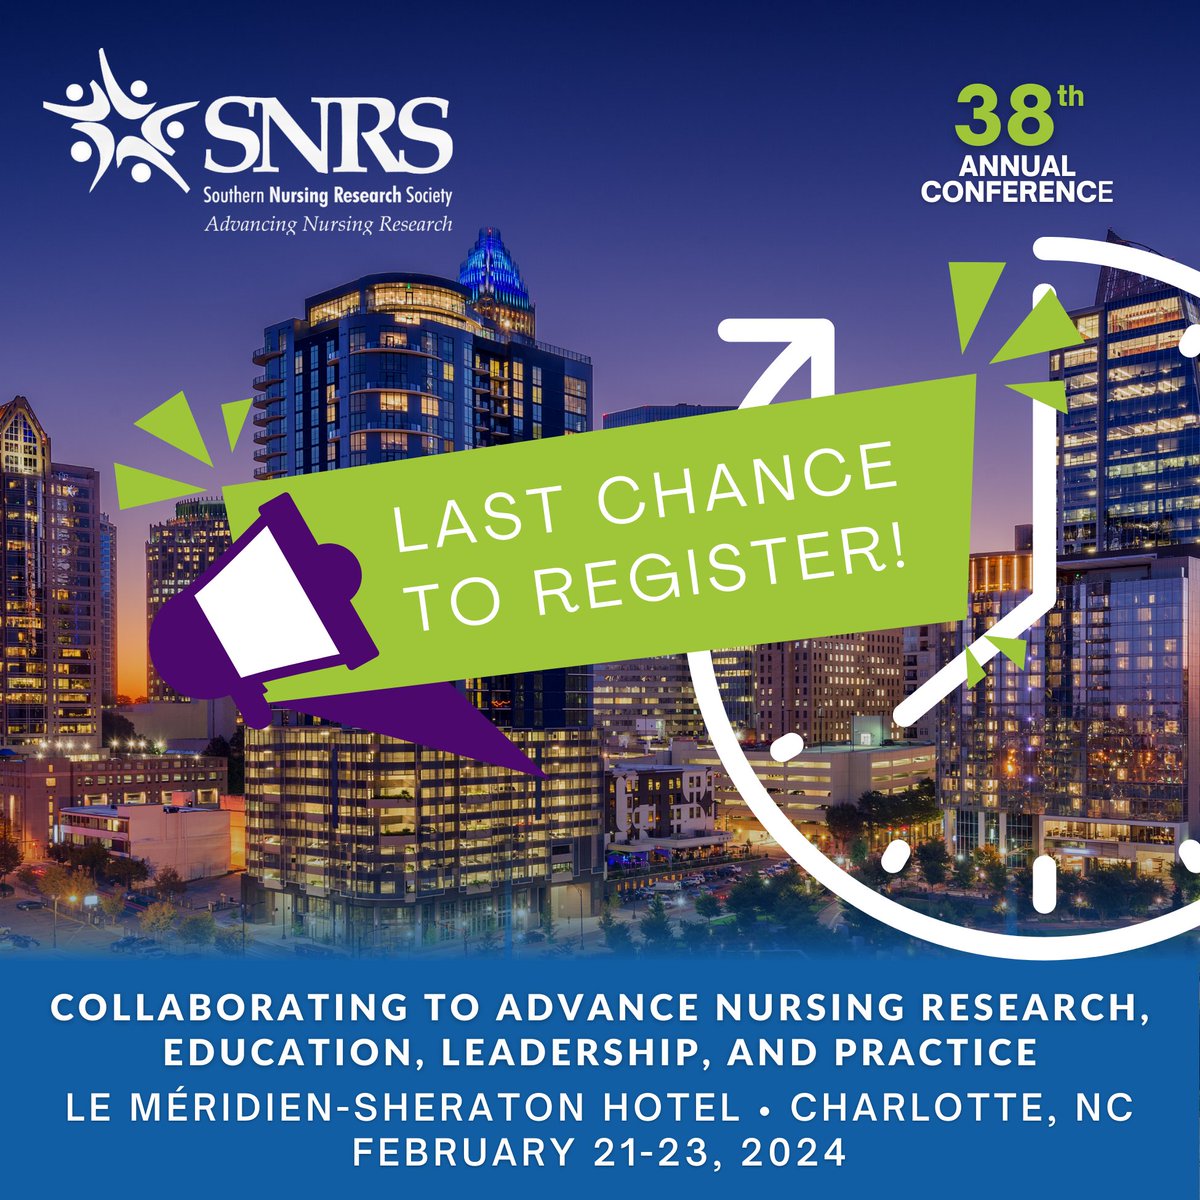 ⏳Last chance to register for the SNRS 38TH Annual Conference, taking place in Charlotte, North Carolina, Wednesday, February 21–Friday, February 23, 2024. *Online registration will close on February 14, 2024, 5:00pm ET.* 💻Register here: snrs.org/events/2024-an…